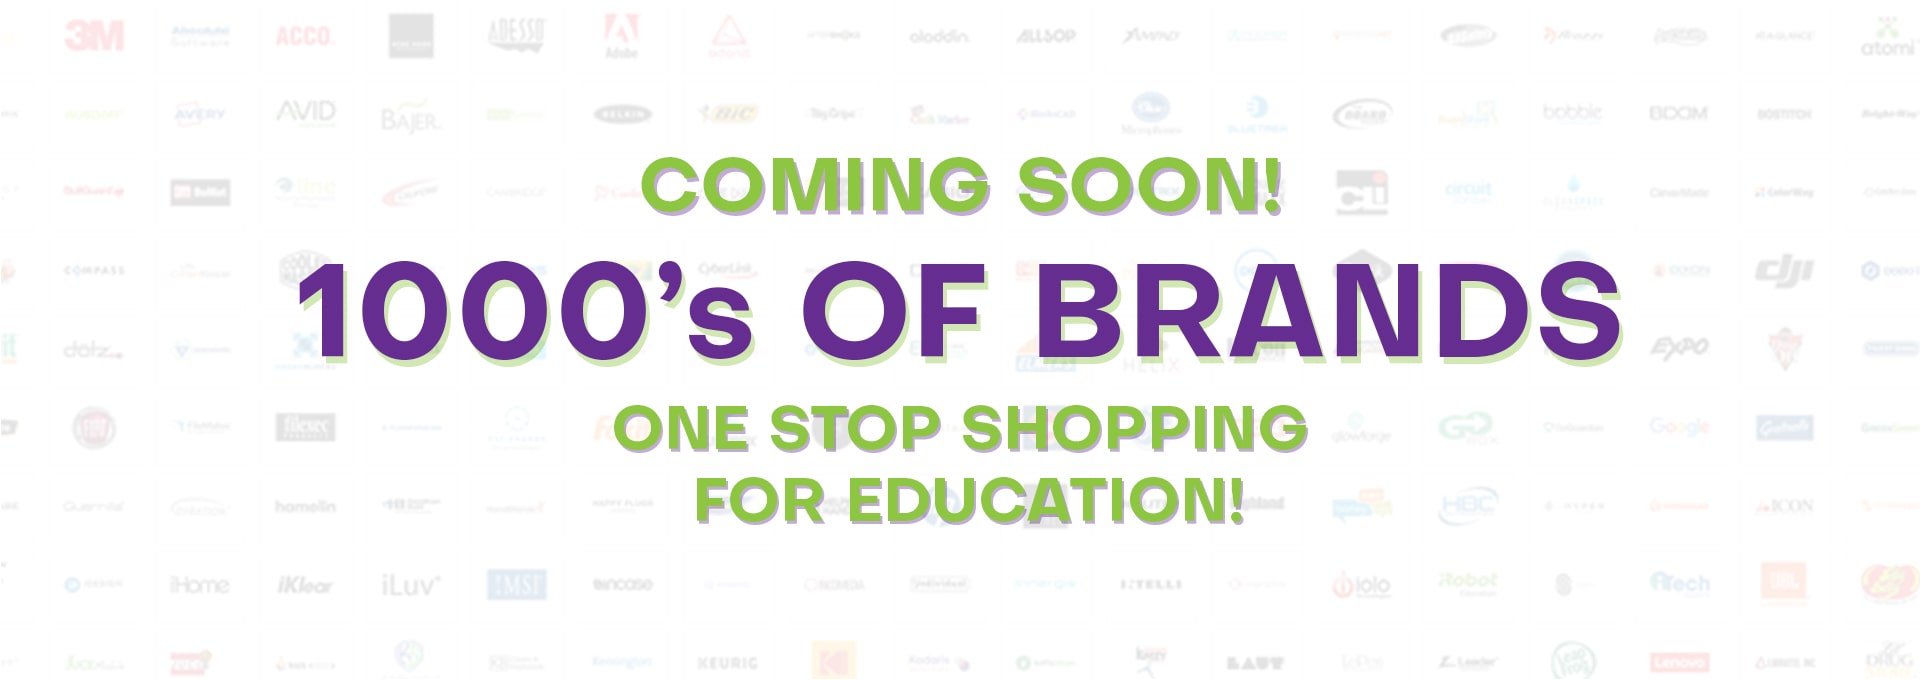 Educational Products - One Stop Shopping